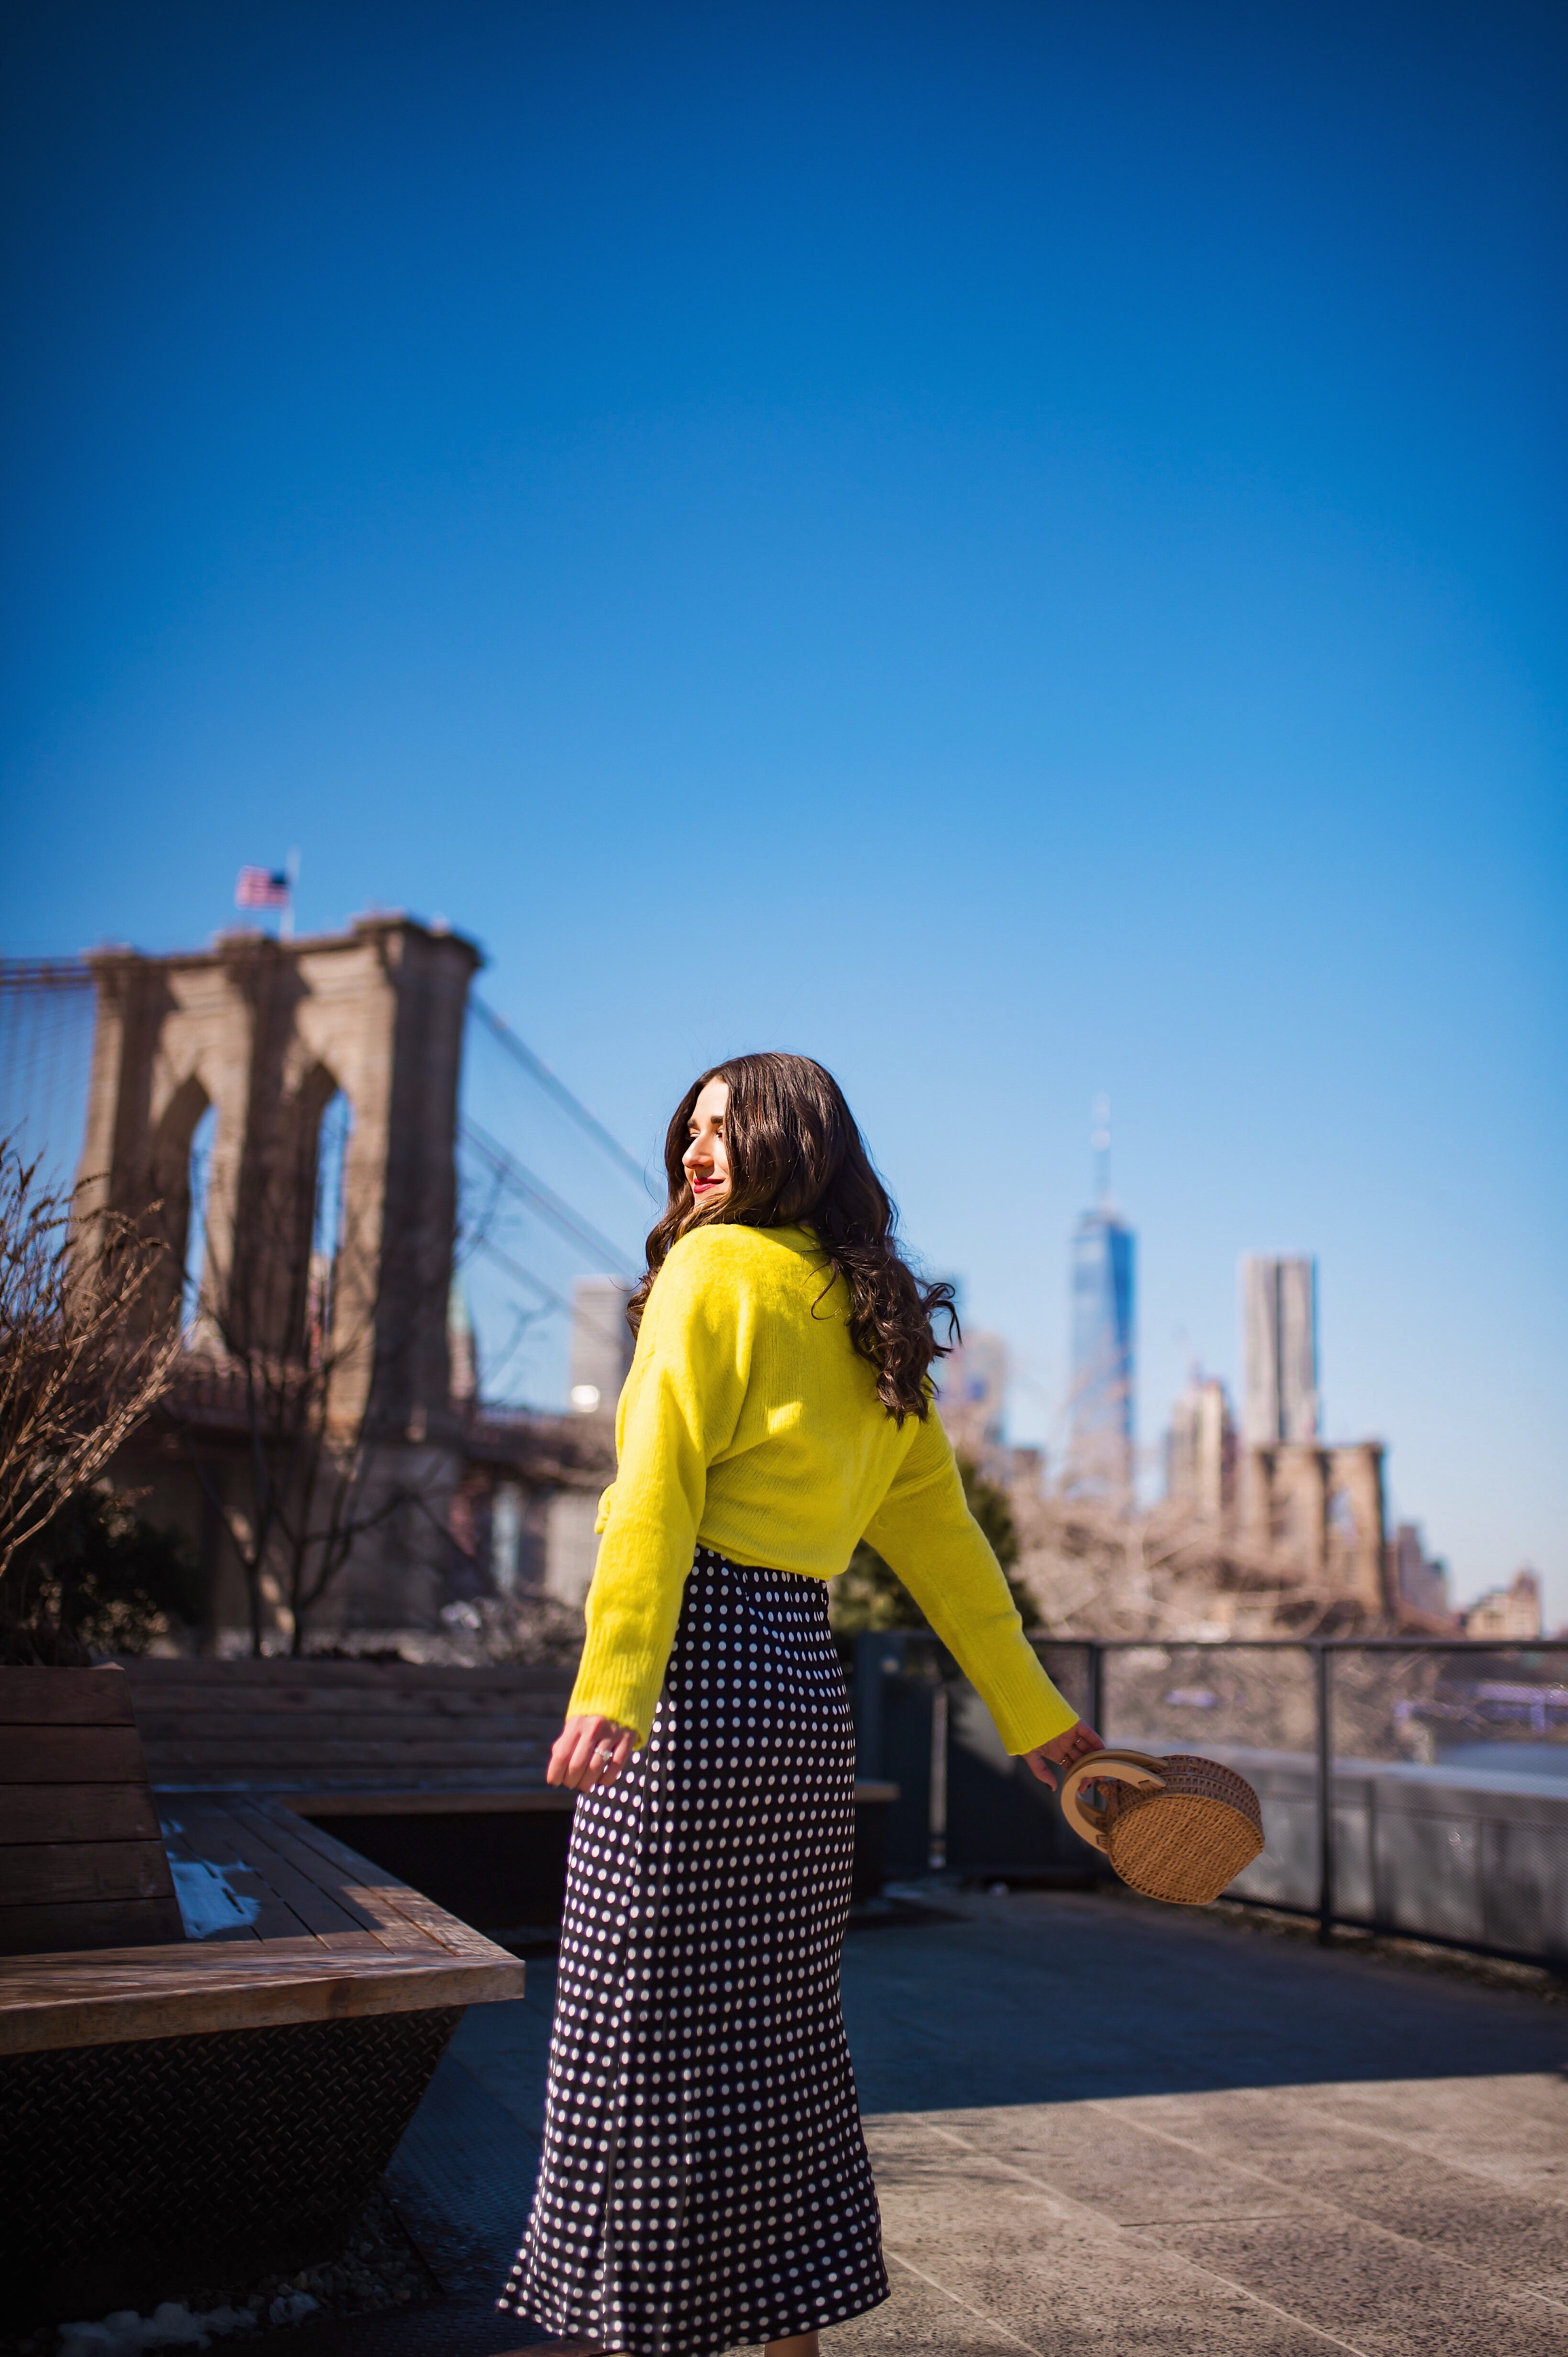 How I Wound Up With Boring White Dishes Navy Polka Dot Dress Neon Yellow Knotted Sweater Esther Santer Fashion Blog NYC Street Style Blogger Outfit OOTD Trendy Shopping Girl What How To Wear Dumbo Brooklyn Bridge Photoshoot Laurel Creative White Heels.JPG